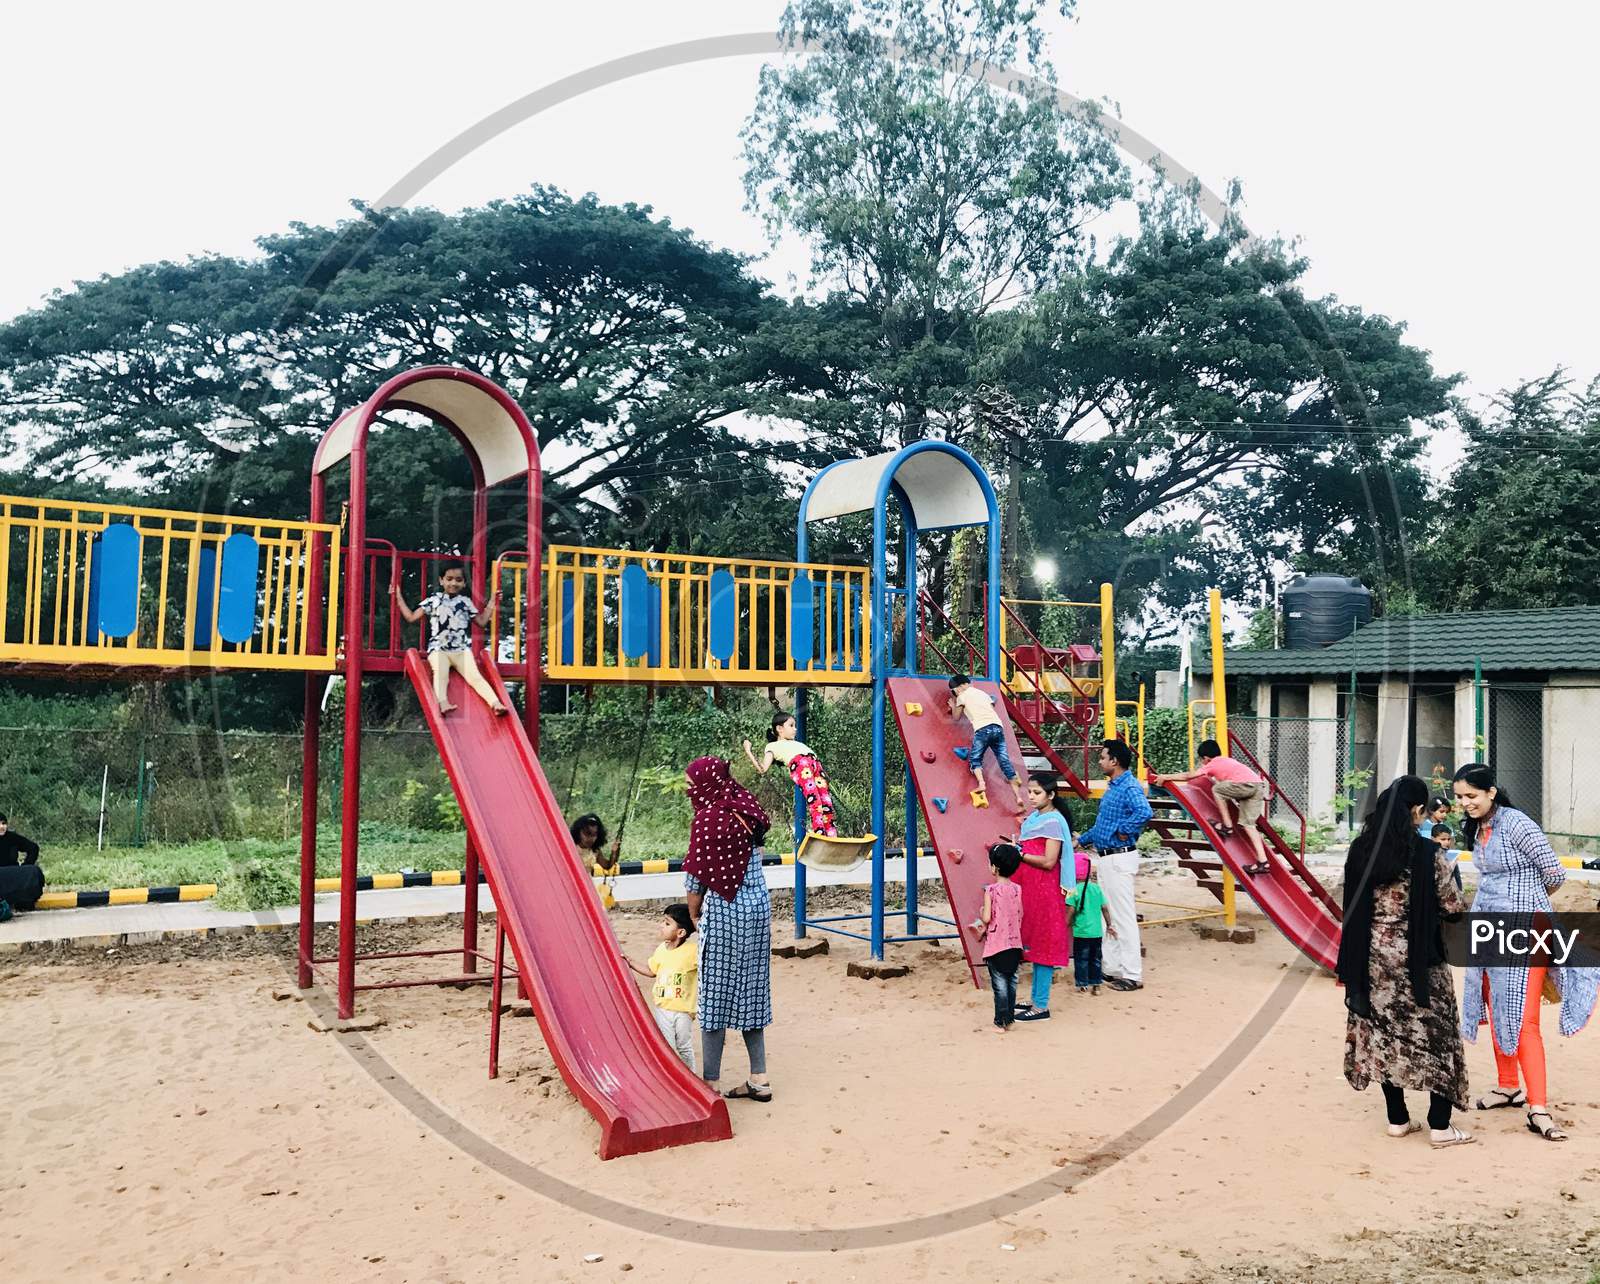 Children playing in a garden play area